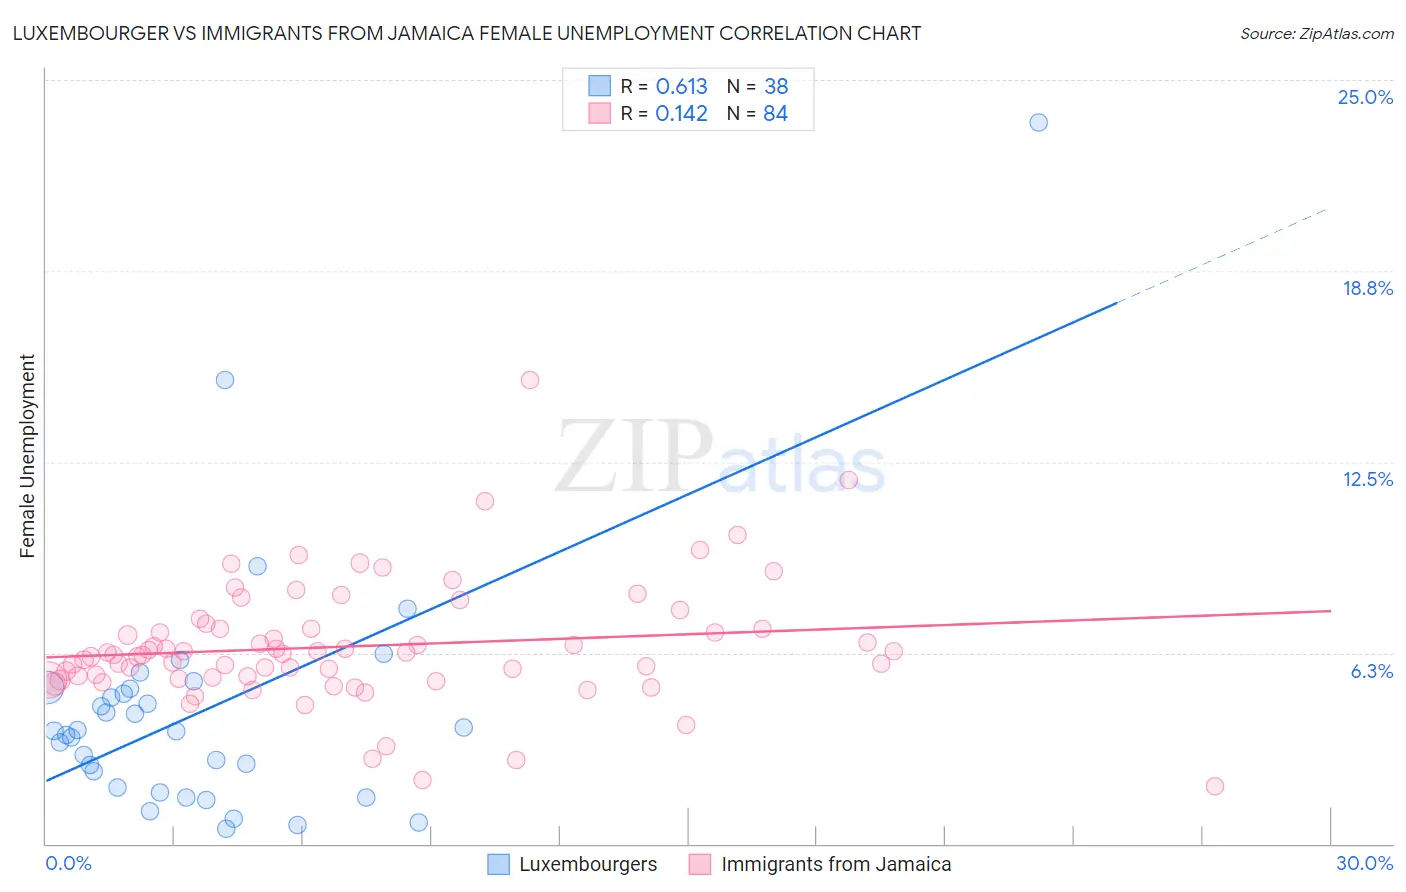 Luxembourger vs Immigrants from Jamaica Female Unemployment